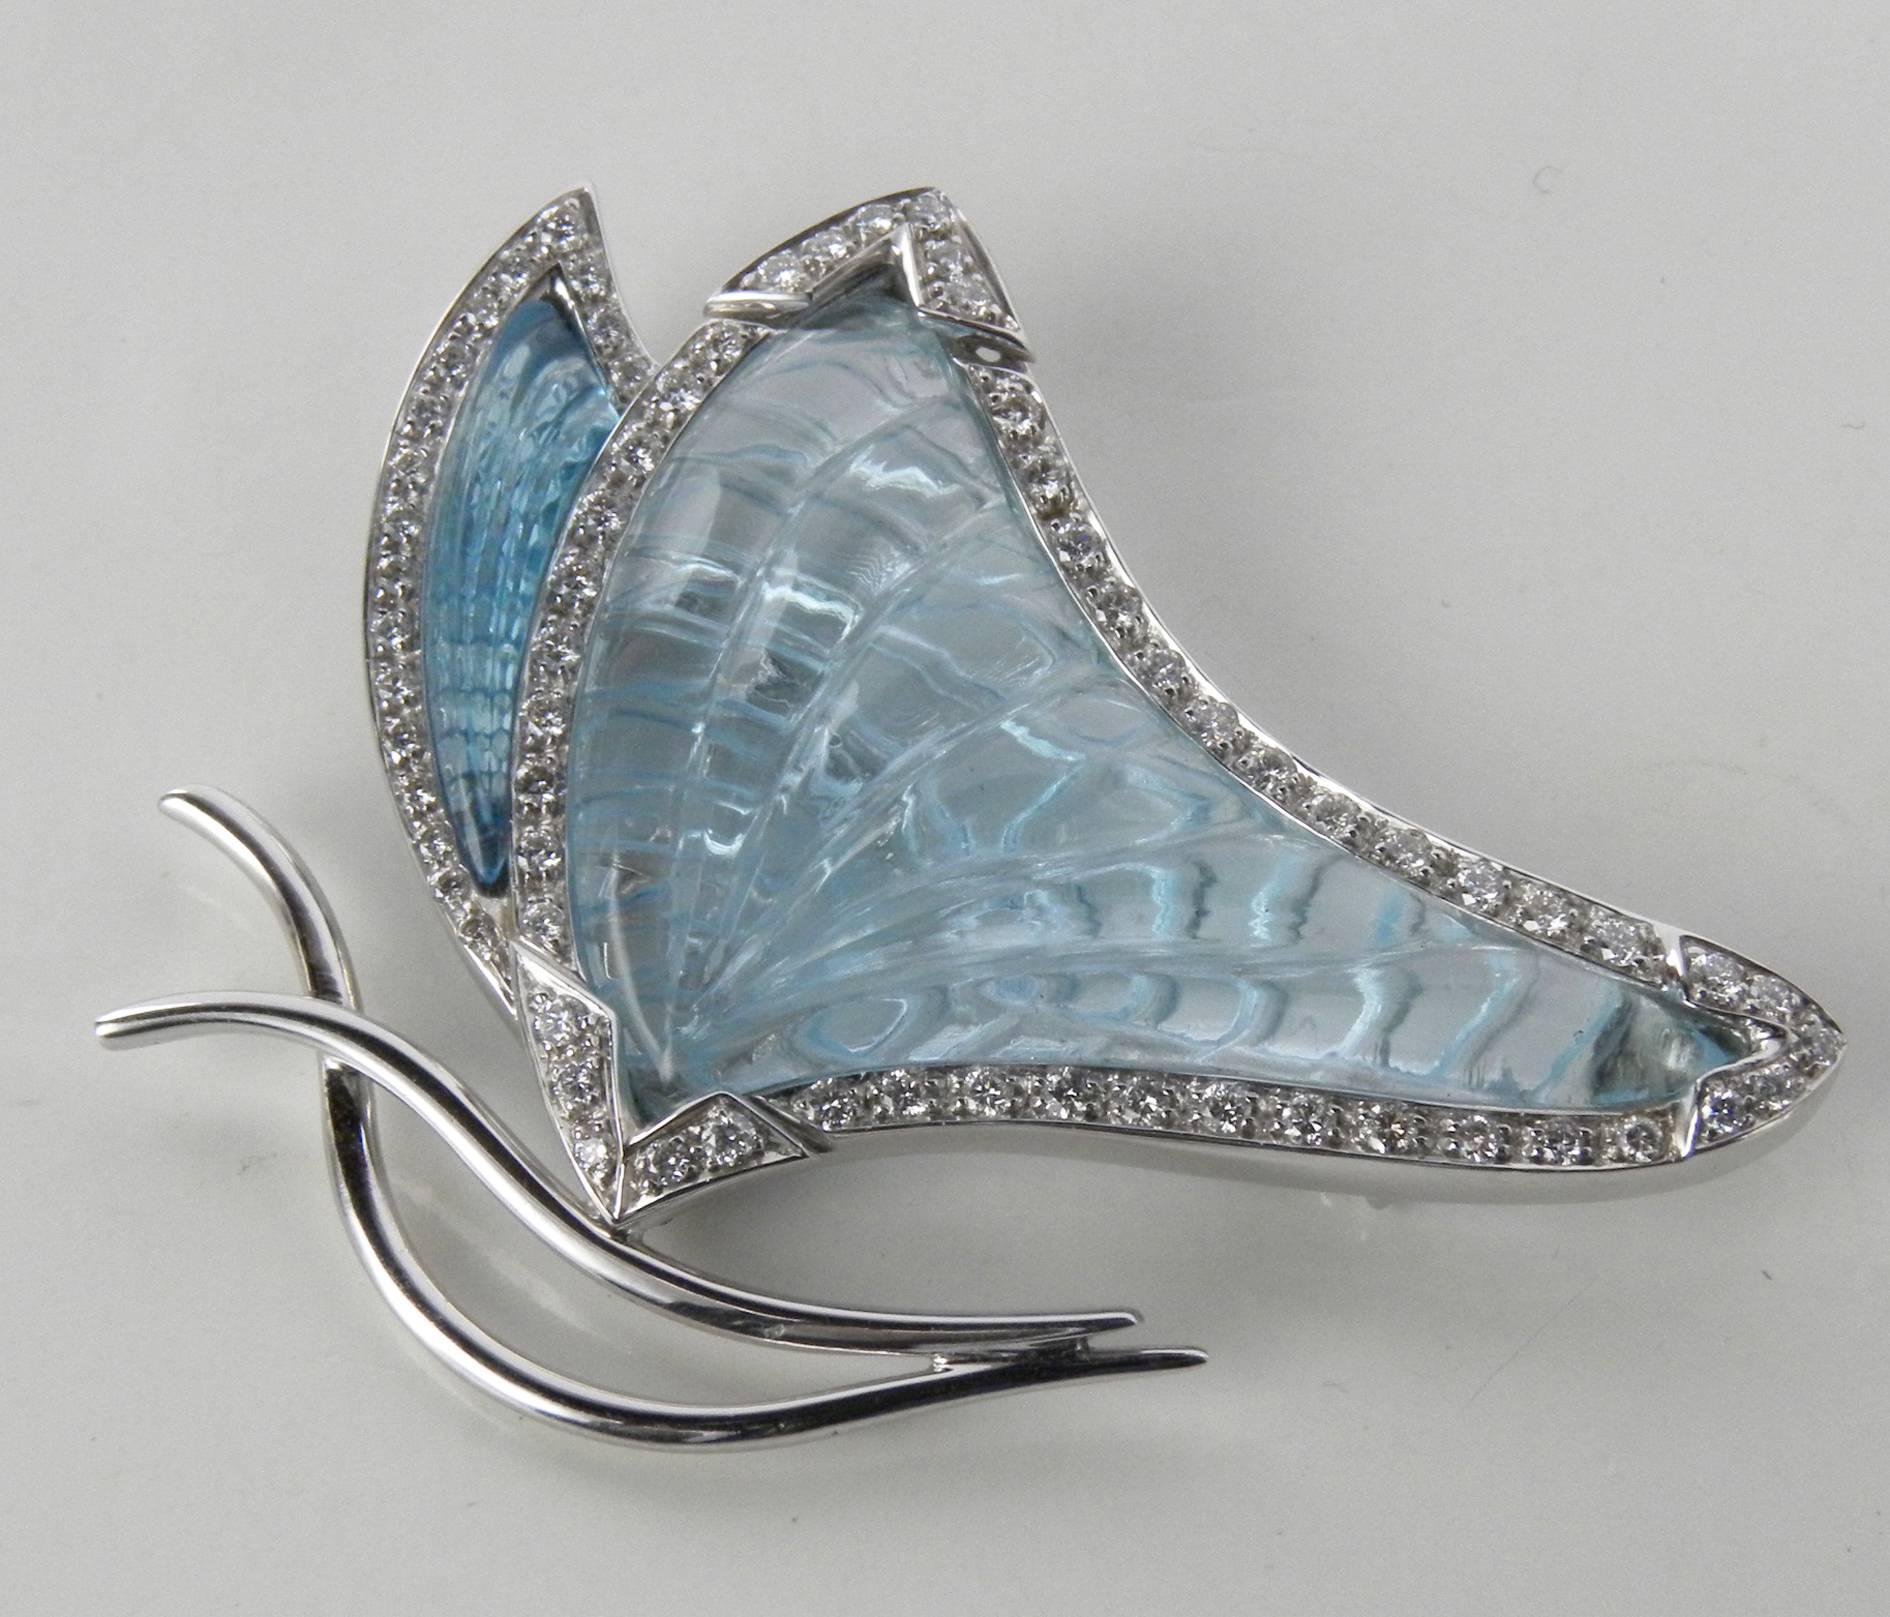 Natural hand inlaid aquamarine (25 Carat) and natural light blue topaz(5 Carat), white diamond setting(0.95 Carat, F-G, Vs1), an extraordinary butterfly brooch: not simply a jewel, a beautiful work of contemporary art. 18 Carat White Gold.
